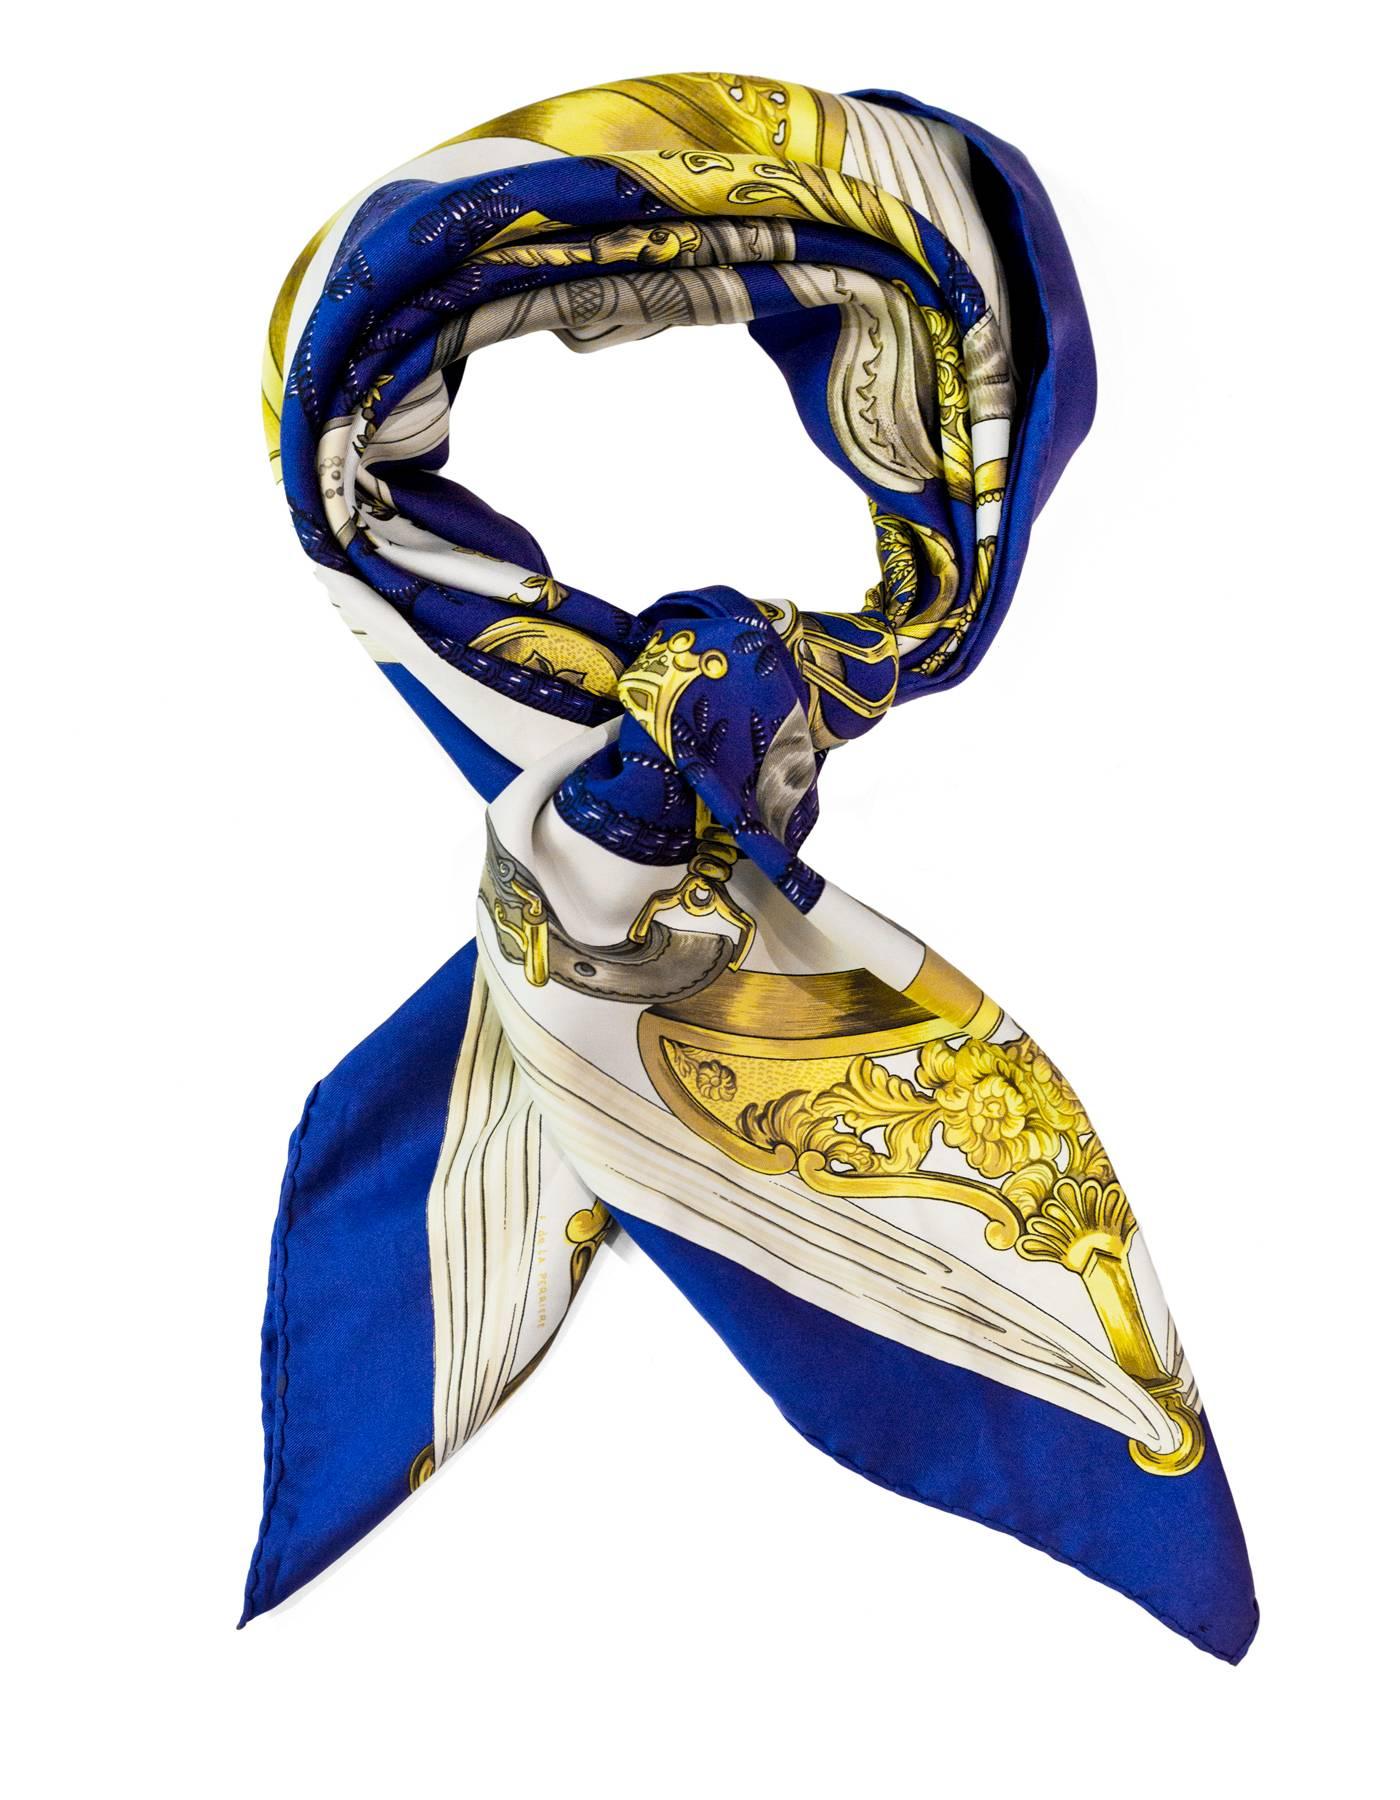 Hermes Blue & Gold Etriers Silk 90cm Scarf

Color: Blue, gold, white
Composition: 100% Silk
Retail Price: $395 + tax
Overall Condition: Very good pre-owned condition with the exception of some soiling/light stains